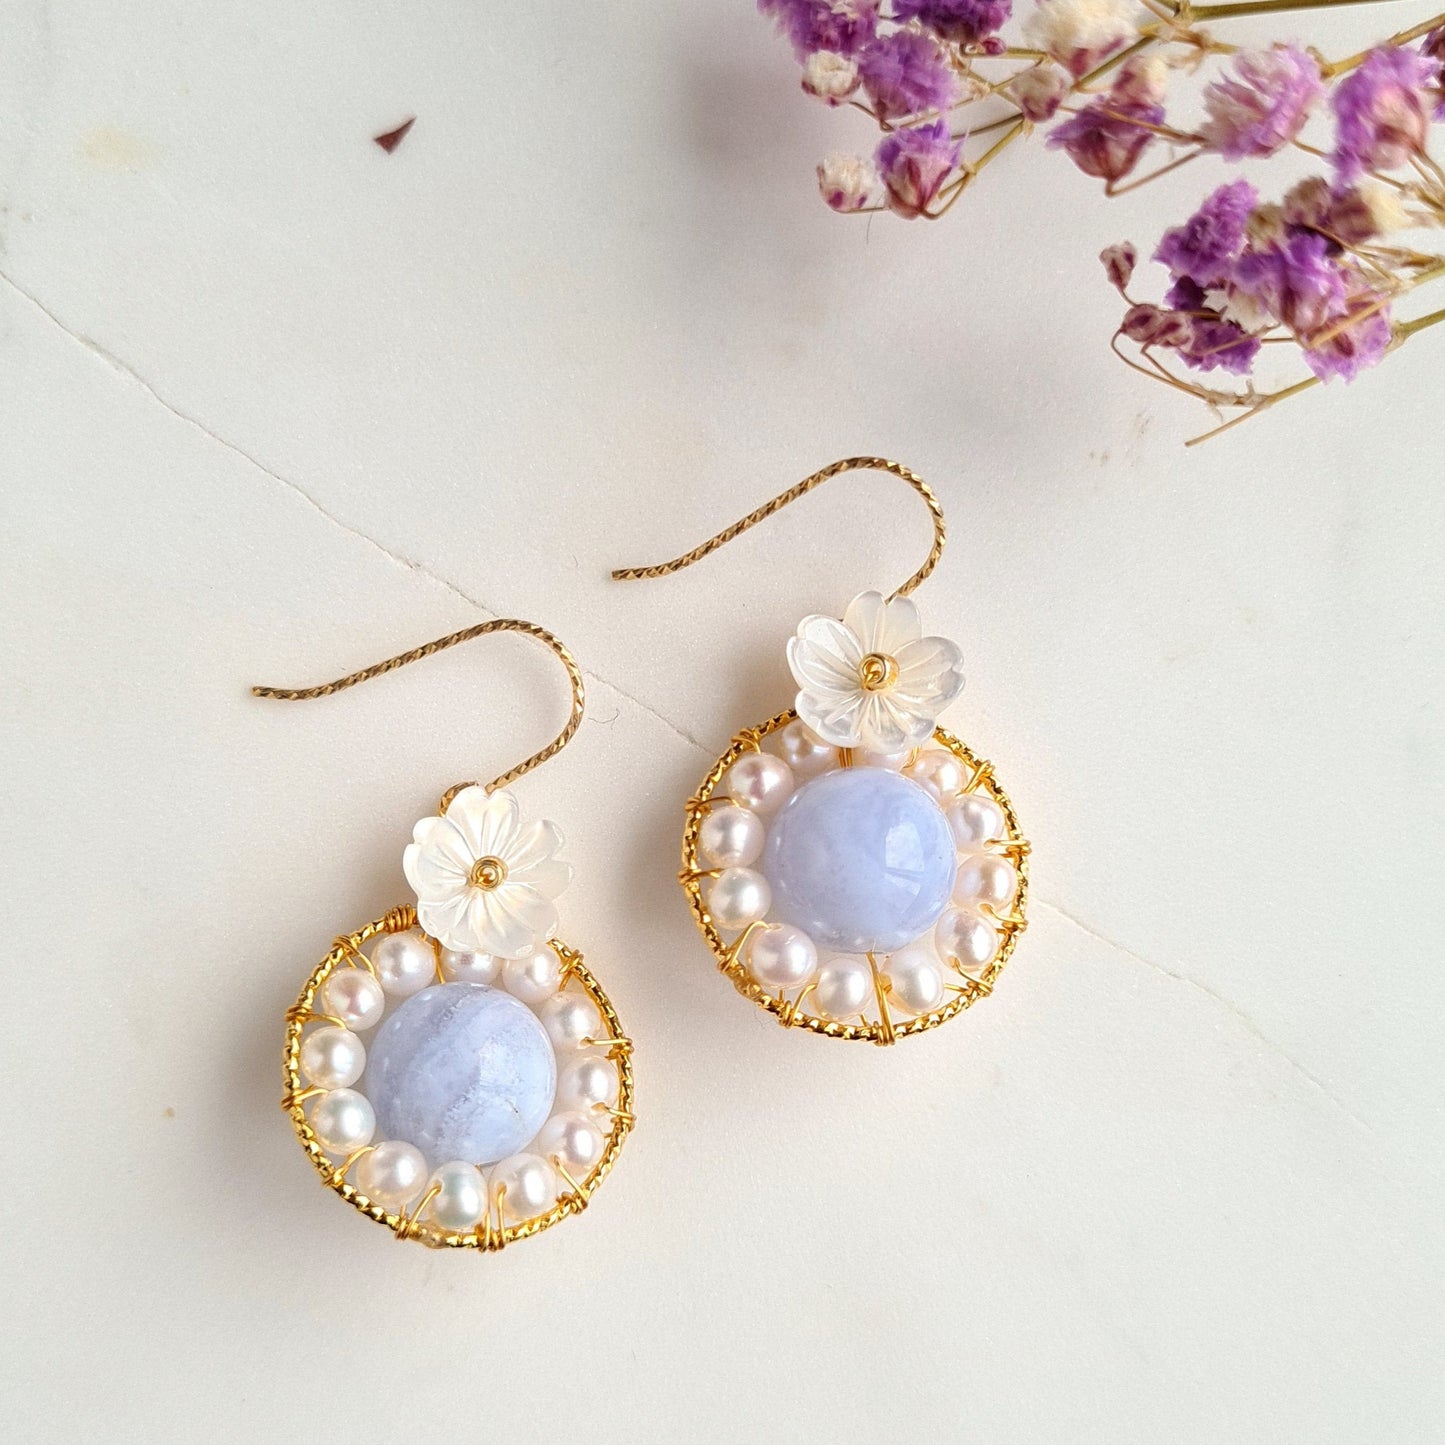 Round Fresh Water Pearl with Blue Lace Agate Gemstone & Flower Mother Of Pearl Earrings